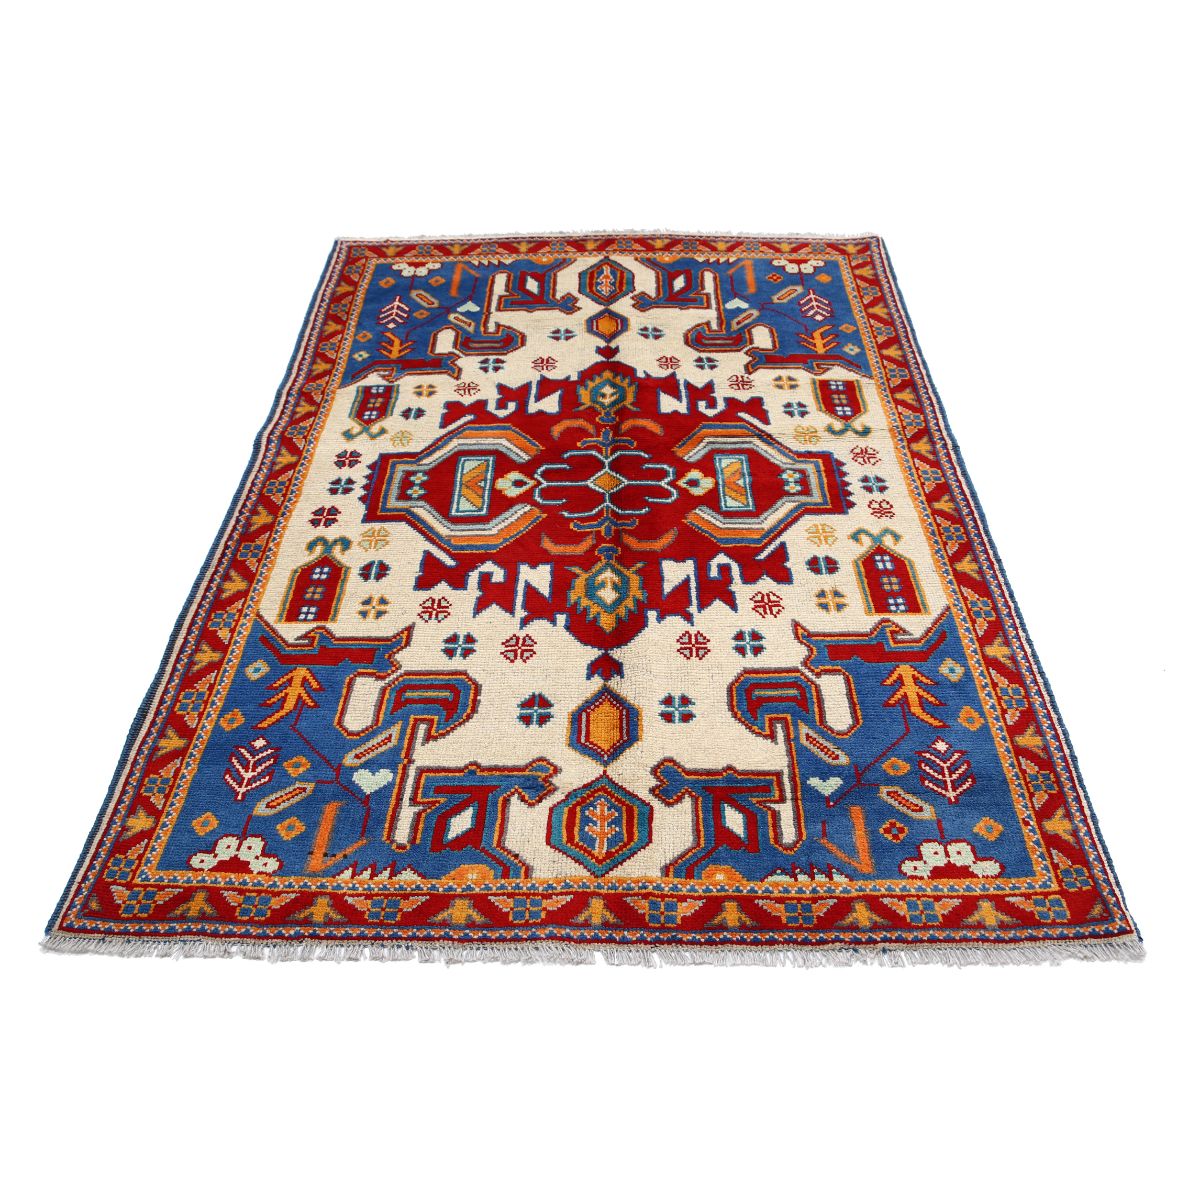 Revival 4' 9" X 6' 8" Wool Hand Knotted Rug